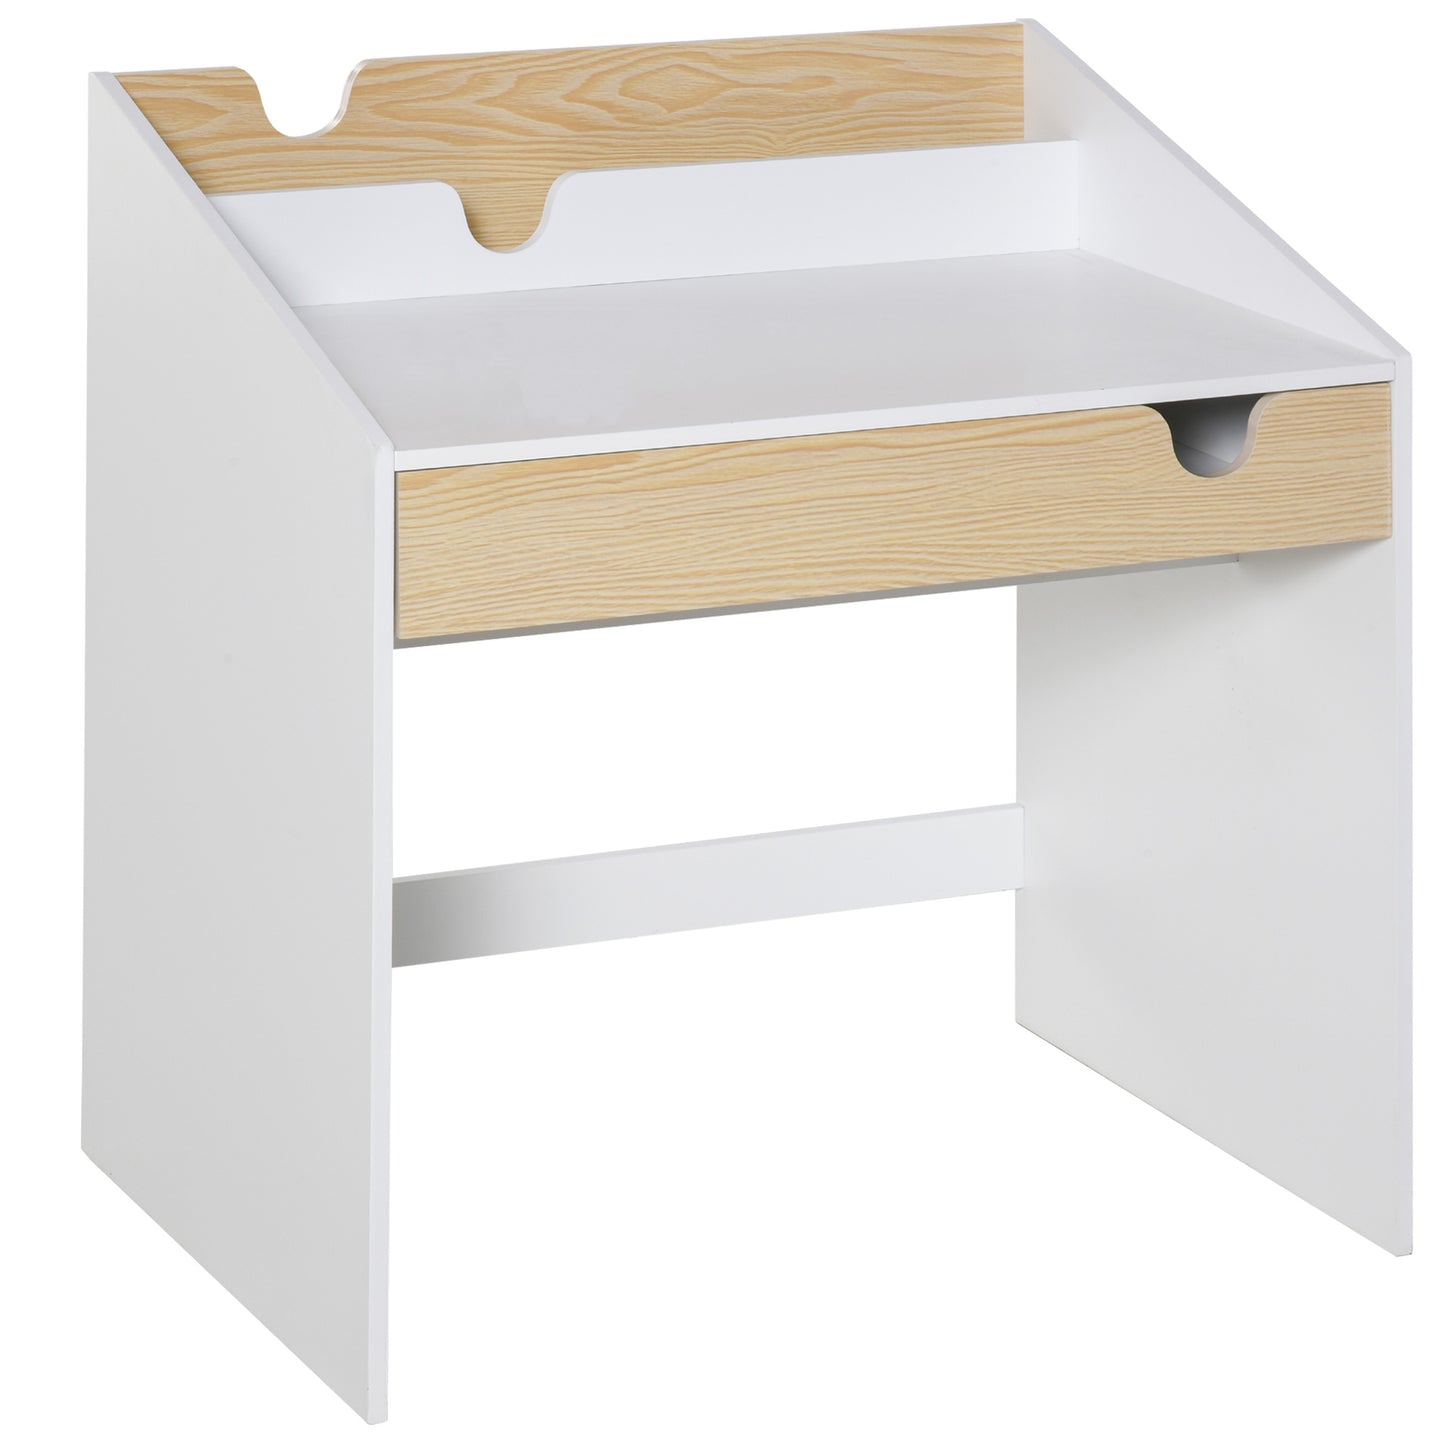 HOMCOM Kids Wooden Writing Study Desk with Drawer Book Storage Layer White and Natural